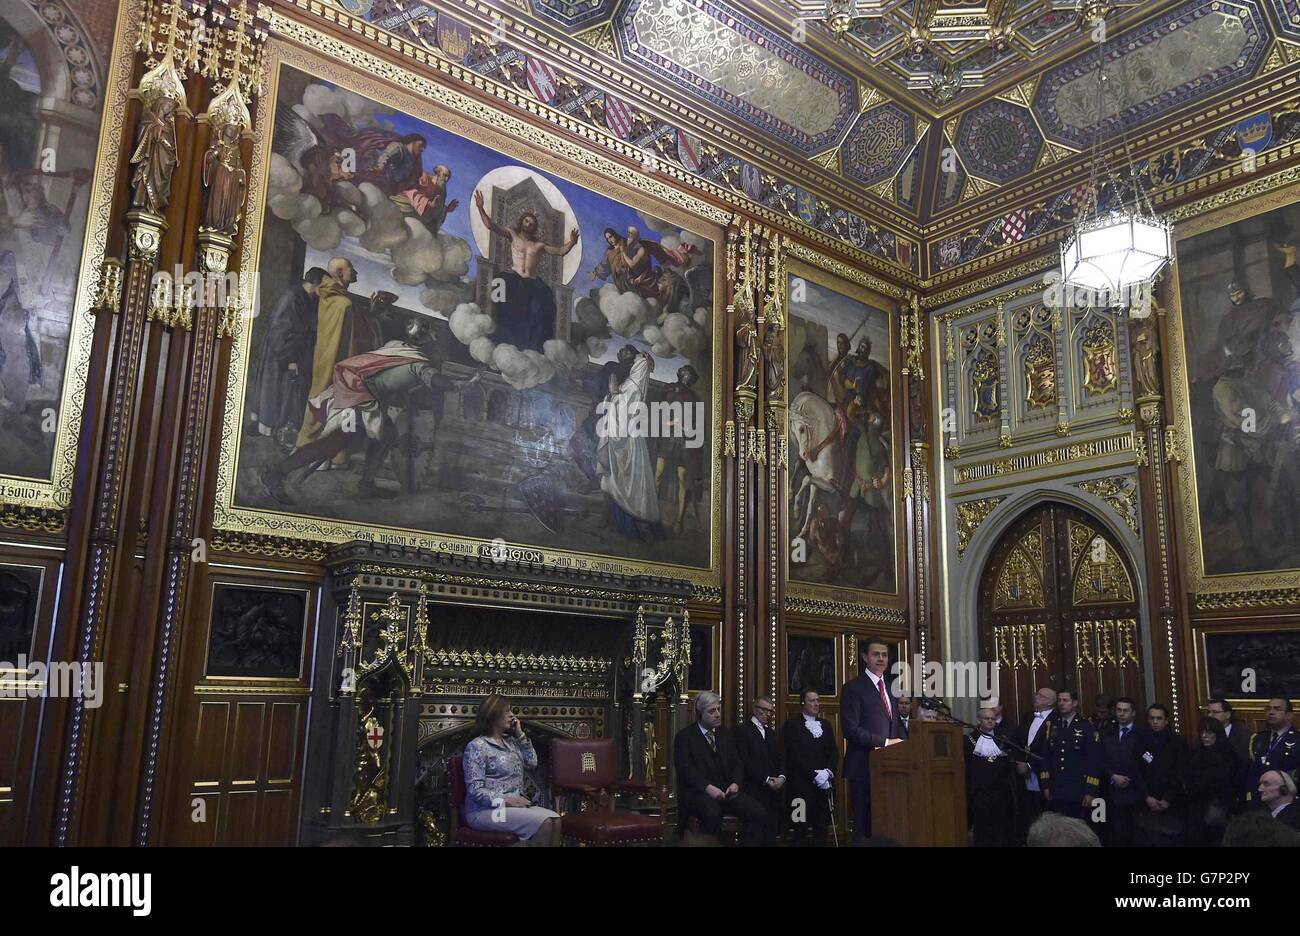 Mexico's President Enrique Pena Nieto delivers an address to members of the British All-Party Parliamentary Group at the Houses of Parliament in London. The President and his wife are guests of Queen Elizabeth II during their three day state visit to Britain. Stock Photo